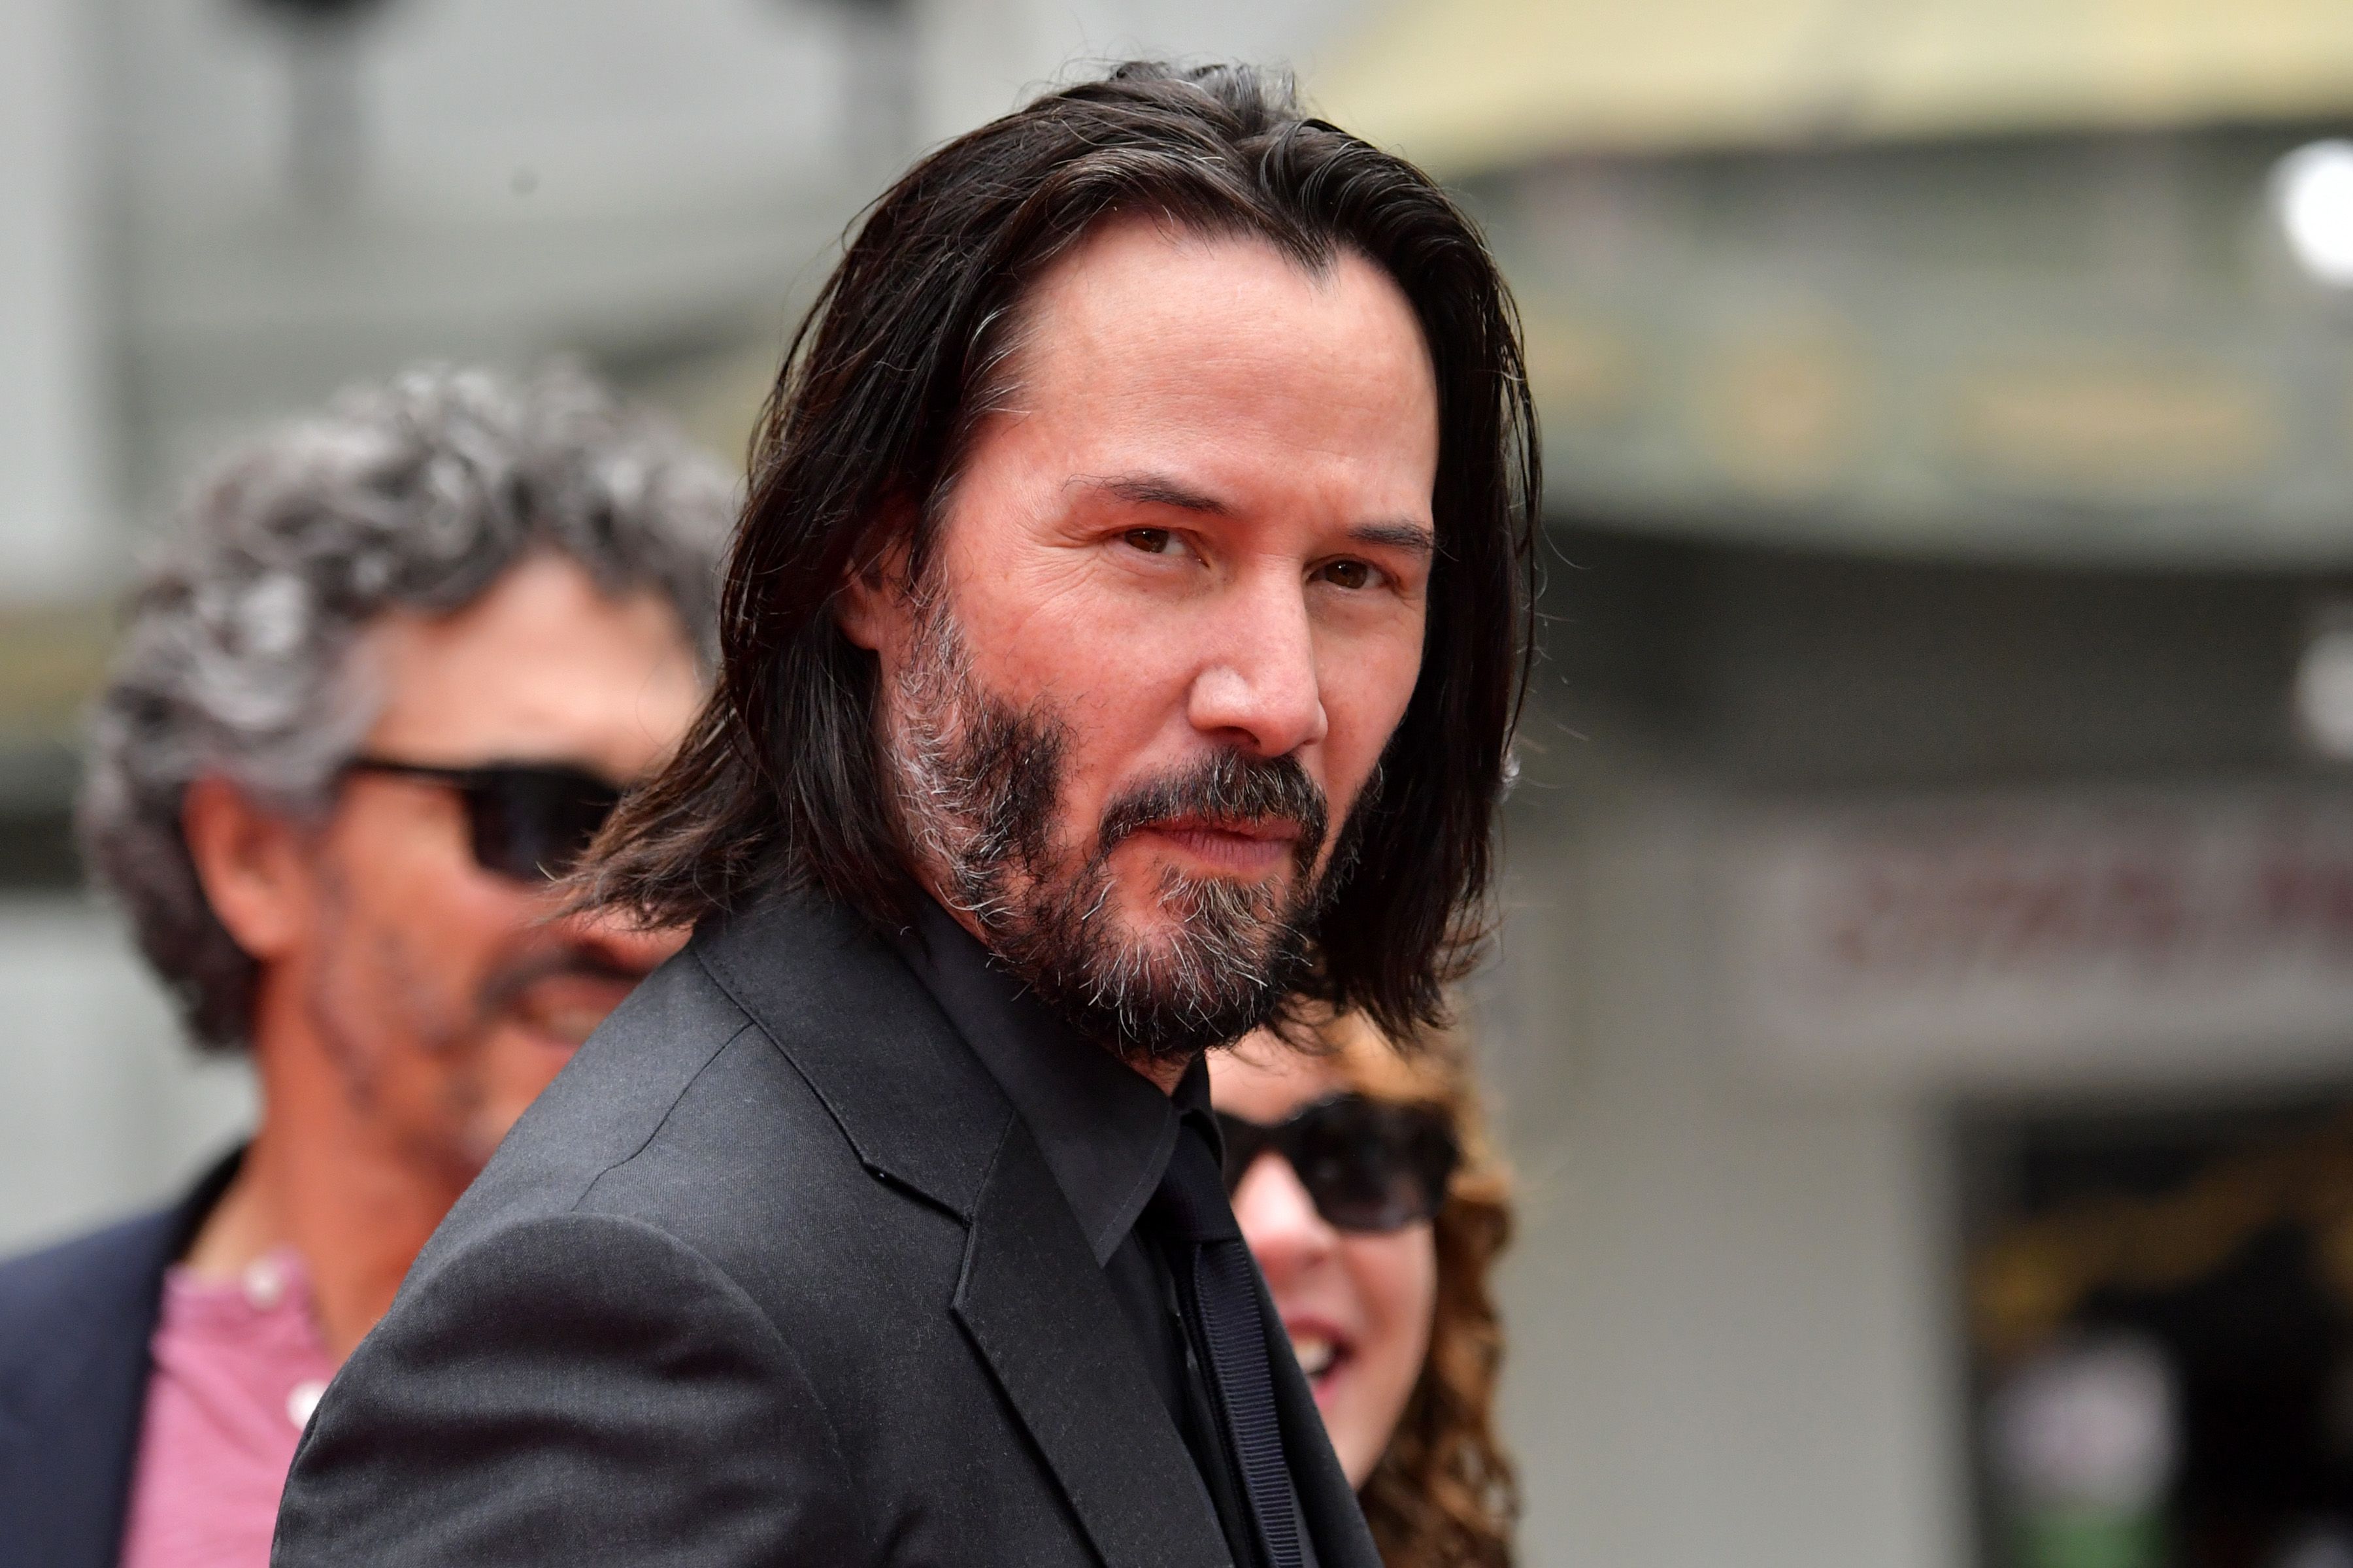 Keanu Reeves Beard - A Look Into The '90s Hollywood Icon's Facial Hair Journey